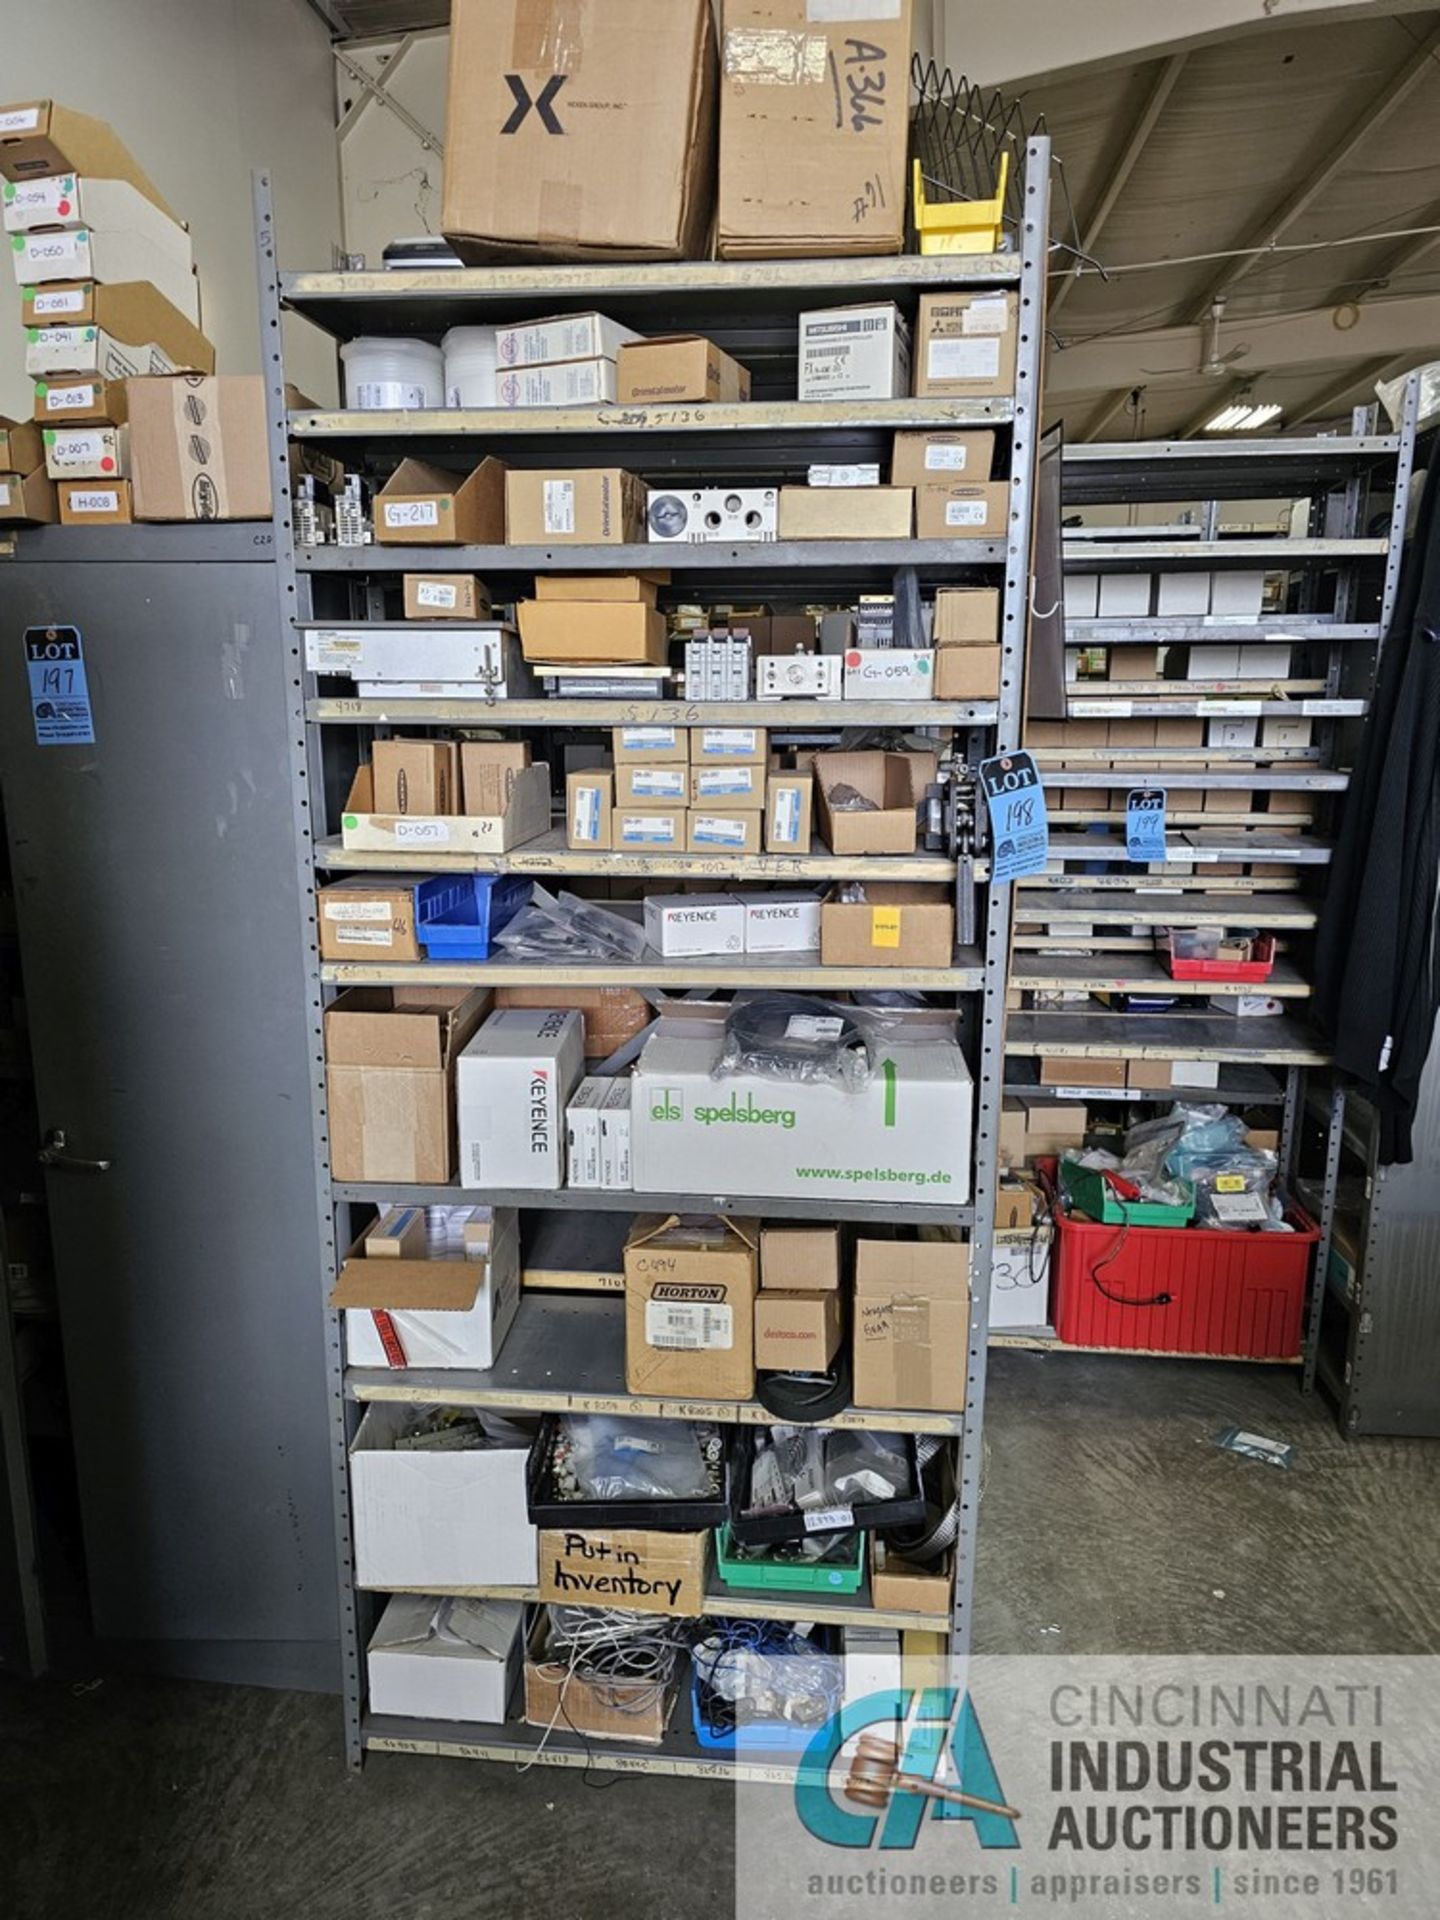 SECTIONS OF SHELVING WITH ELECTRICAL ITEMS BY KEYENCE, SMC, MITSUBISHI, SPELSBERG AND OTHERS